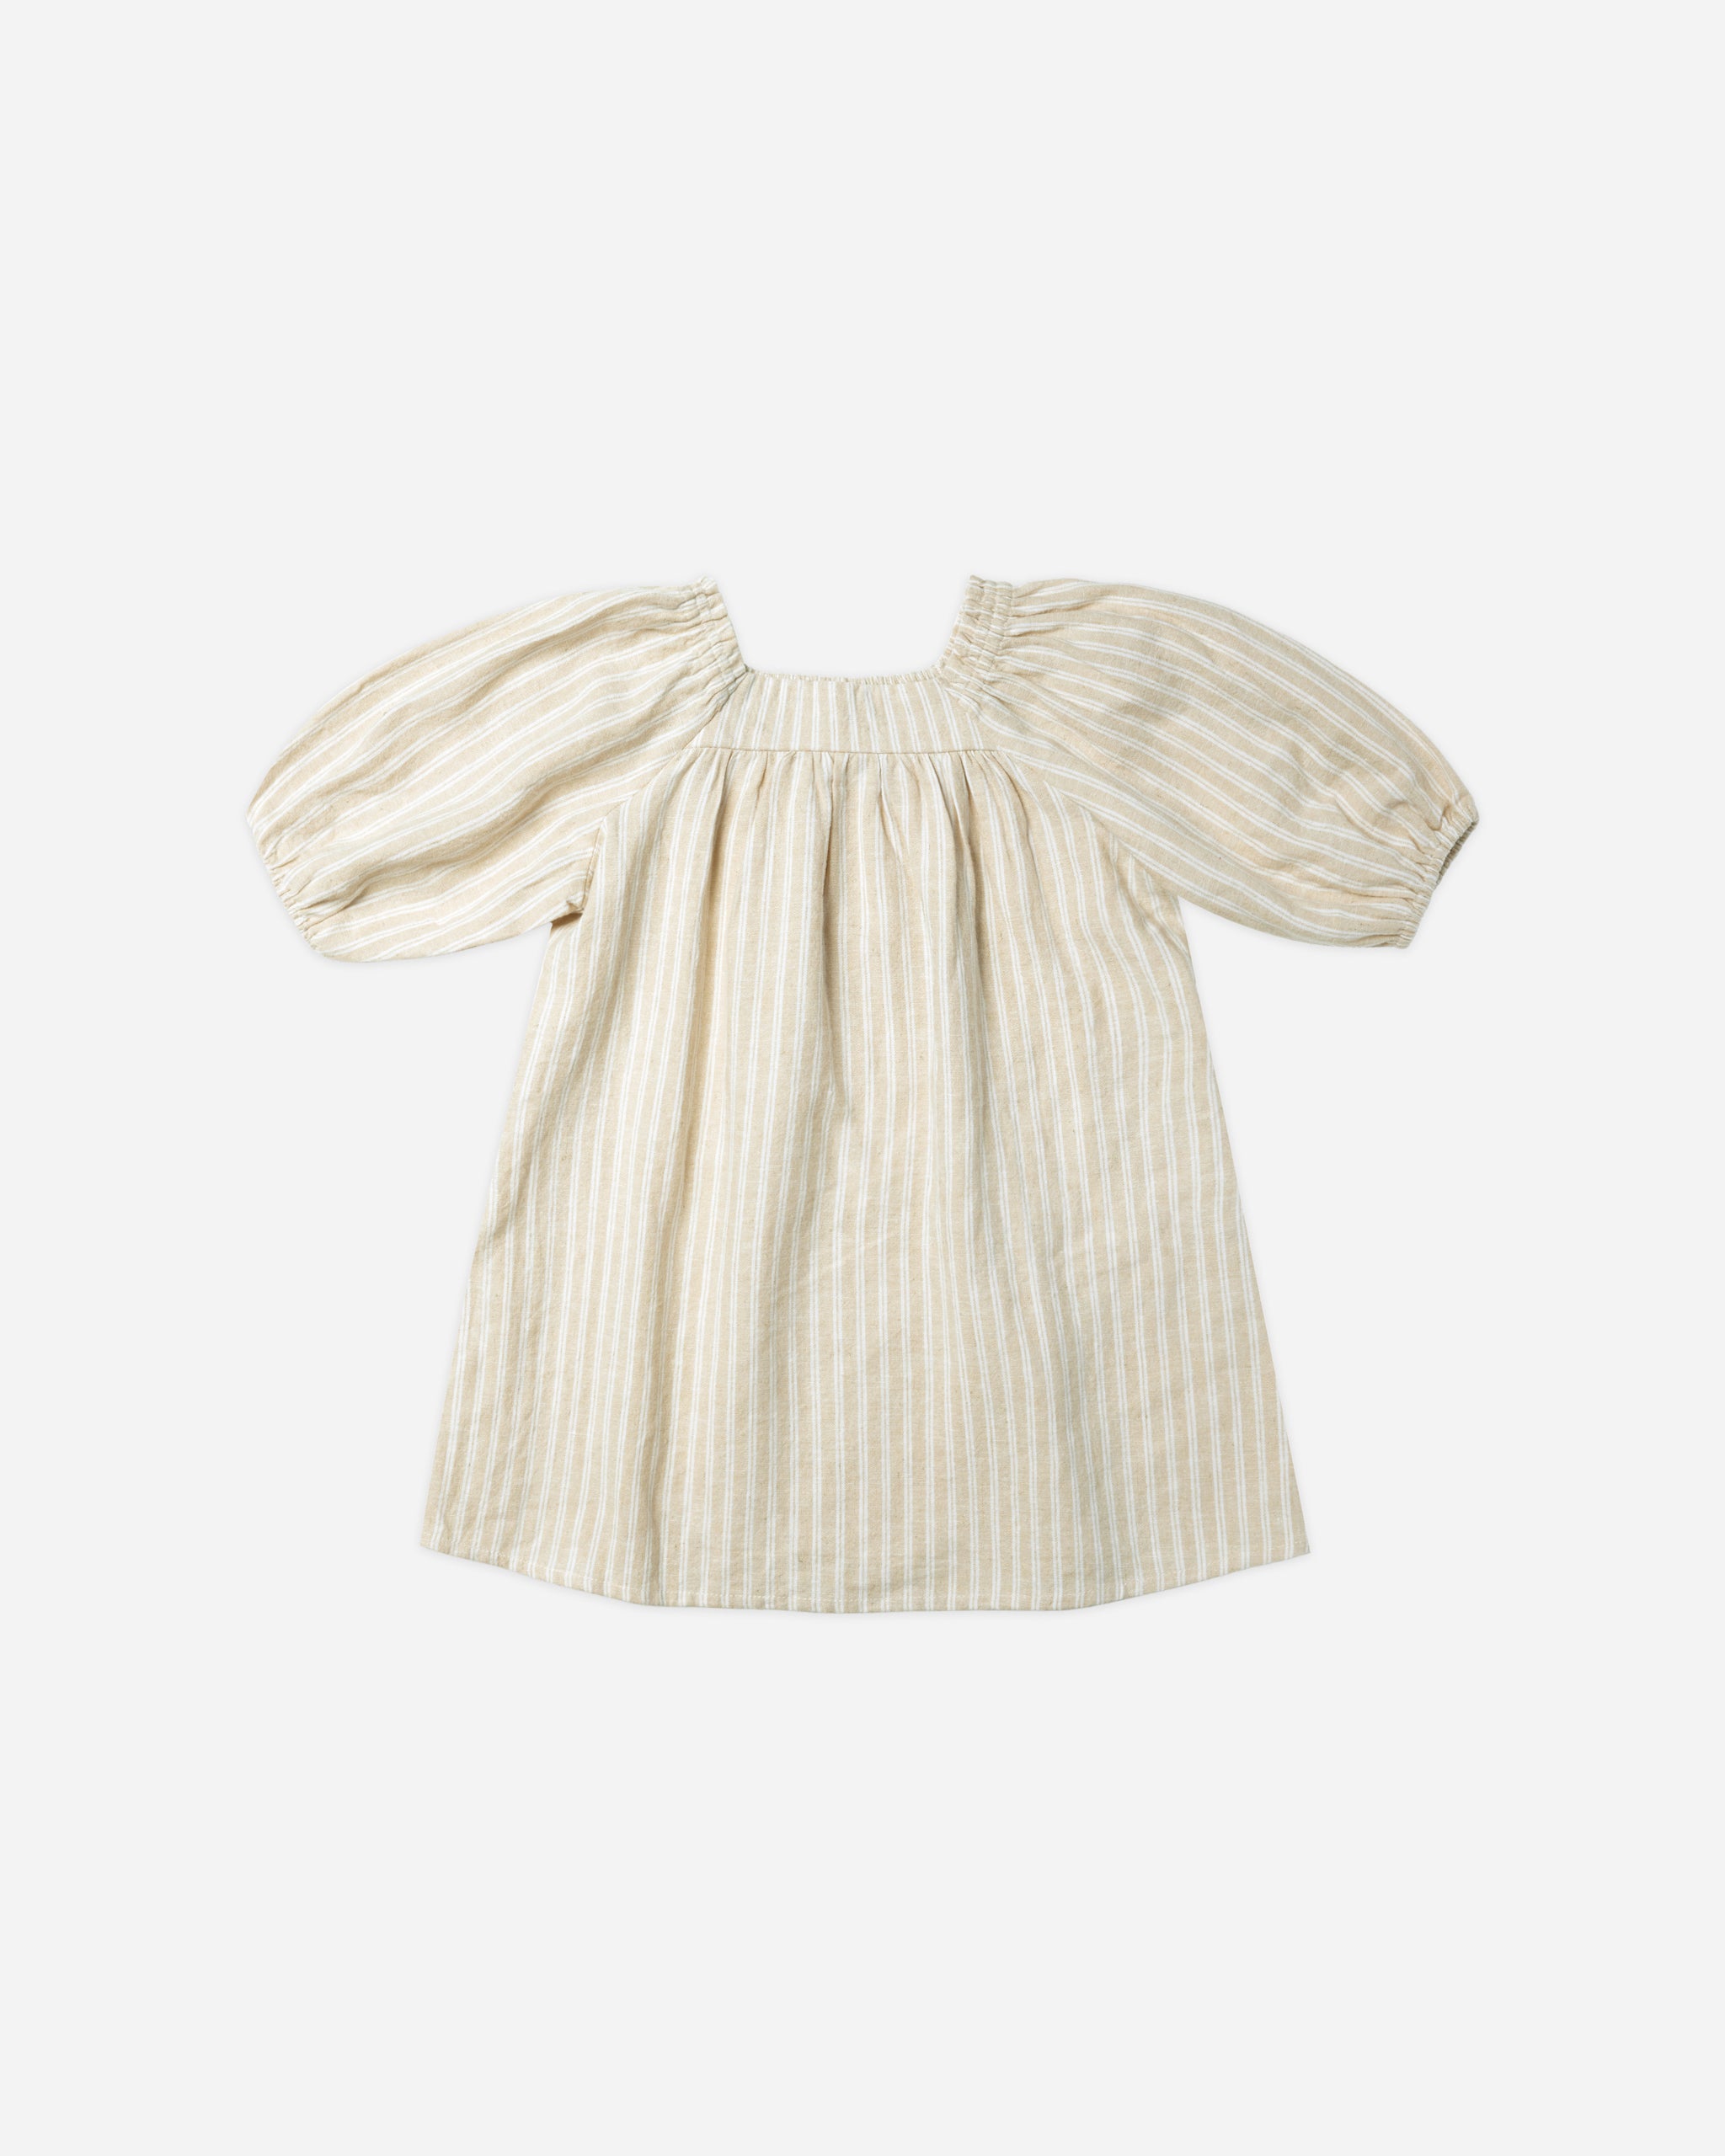 Talee Dress || Champagne Stripe - Rylee + Cru | Kids Clothes | Trendy Baby Clothes | Modern Infant Outfits |